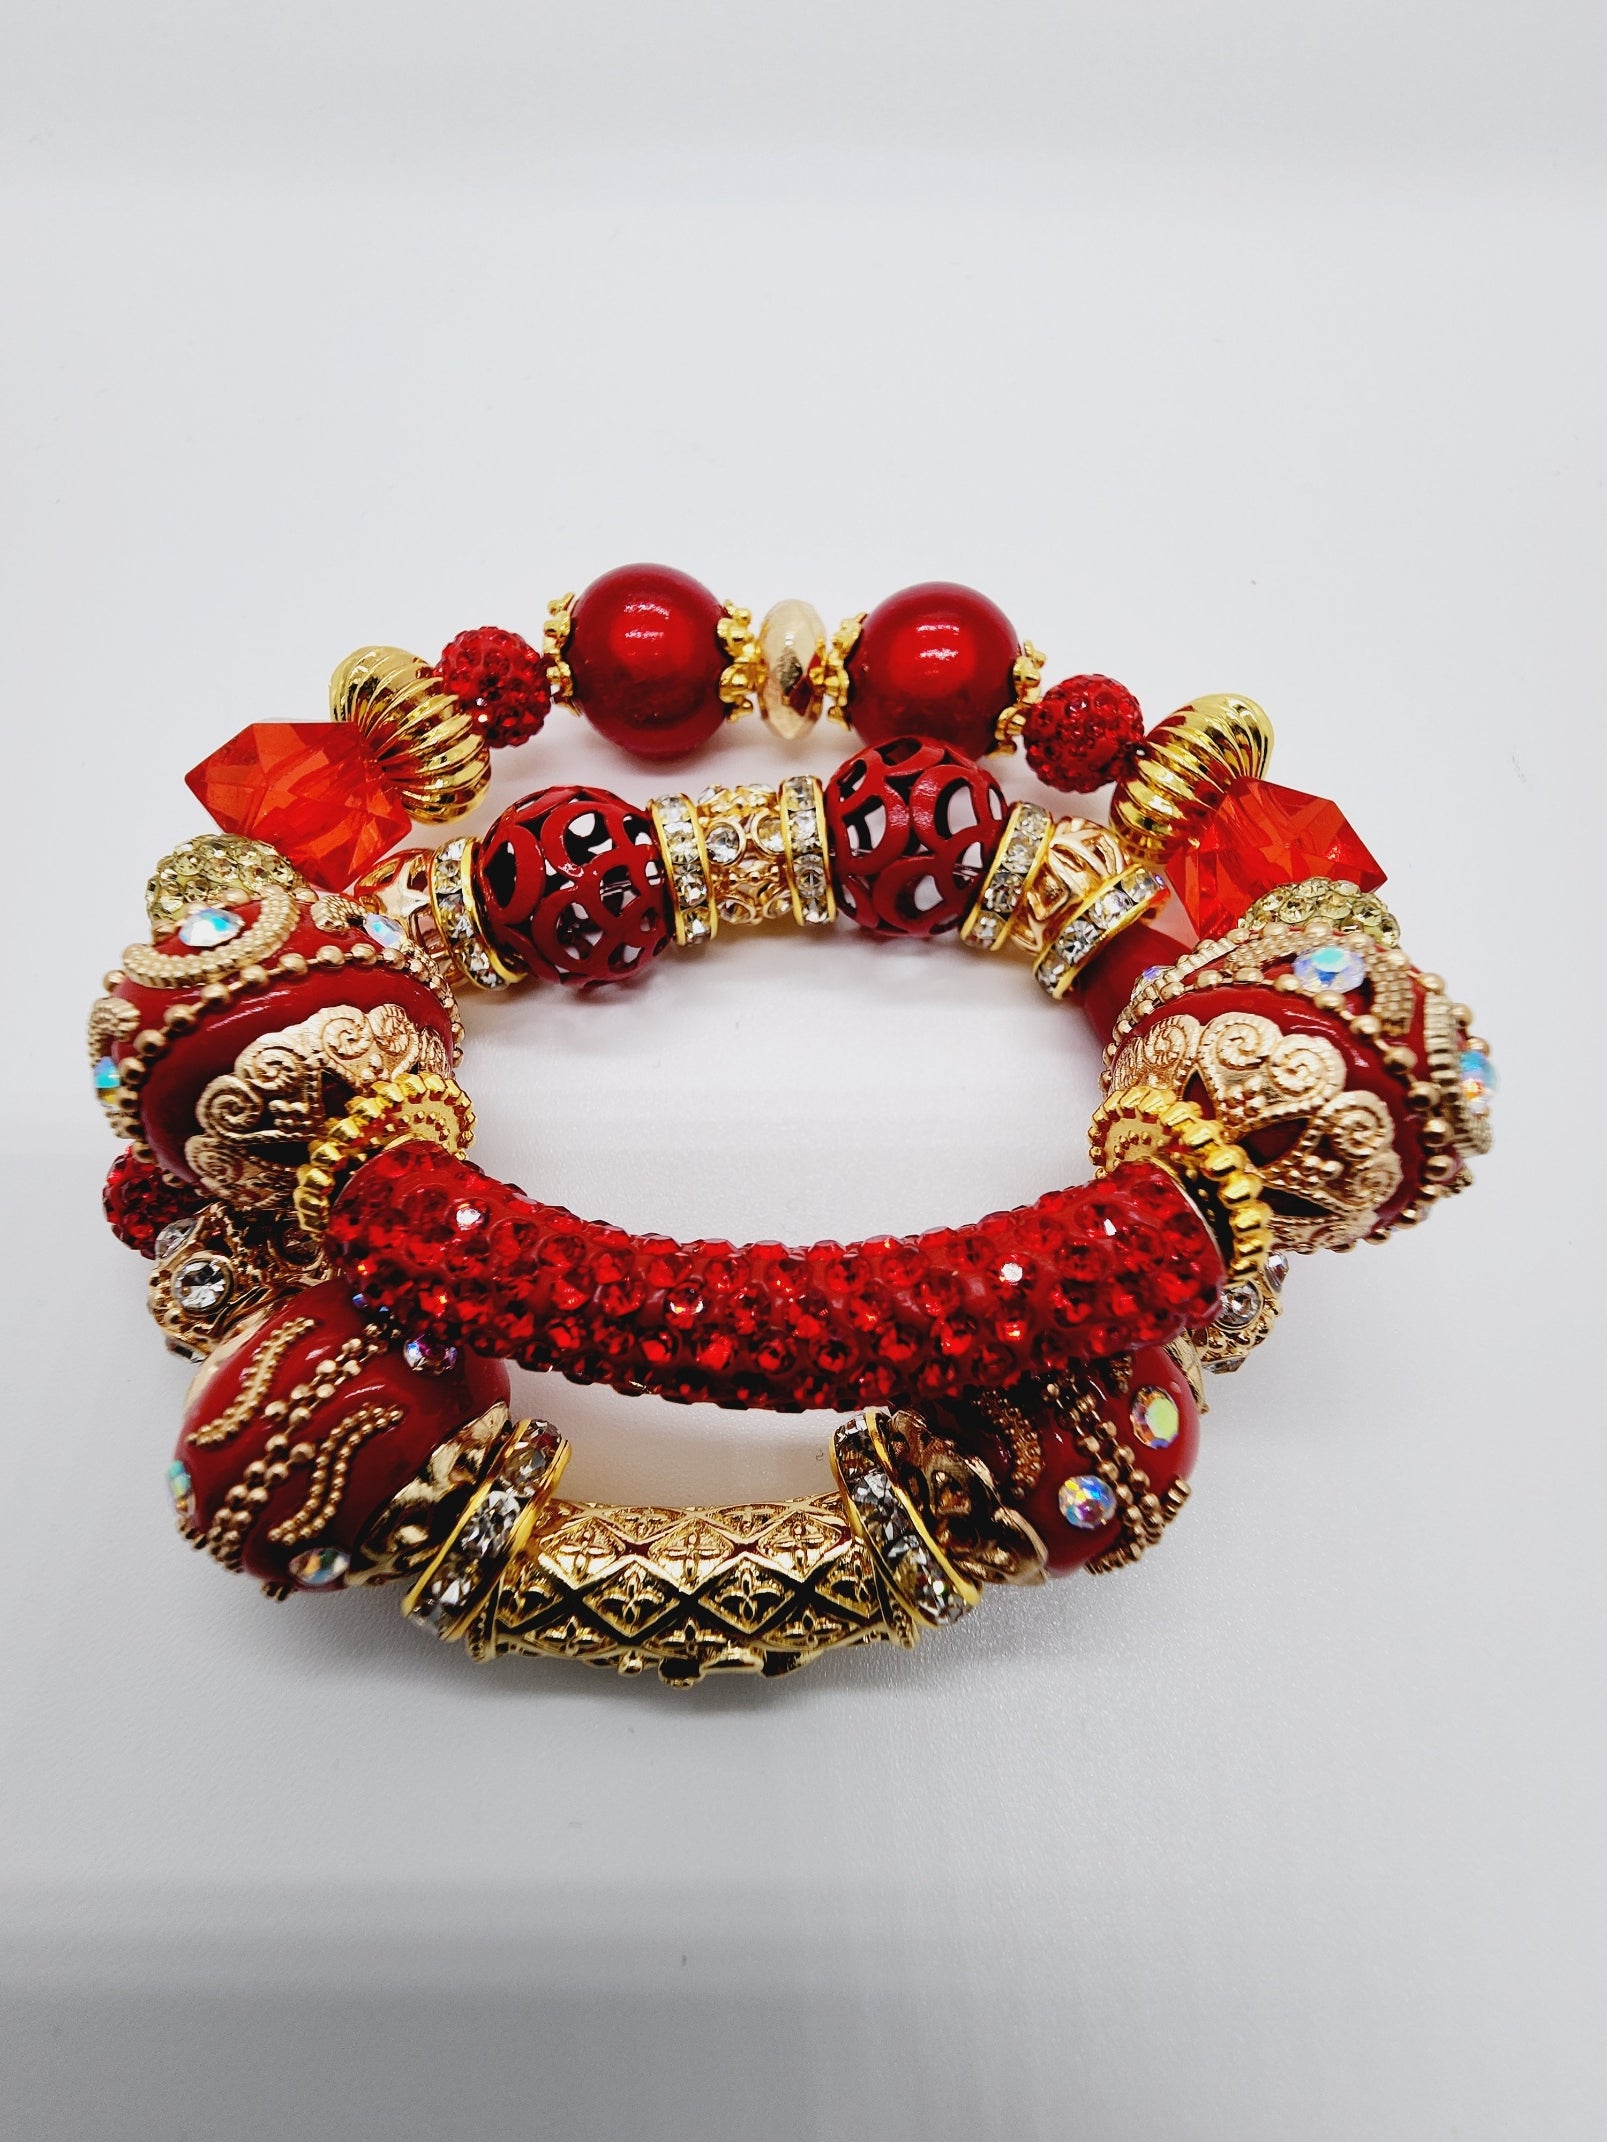 Length: 7.75 inches | Weight: 2.7 ounces  Distinctly You! This bracelet set is handmade using red and gold and ornate bead mix, gold rhinestone rondelle spacers, and bracelet uses 8mm latex free clear stretch cord. 